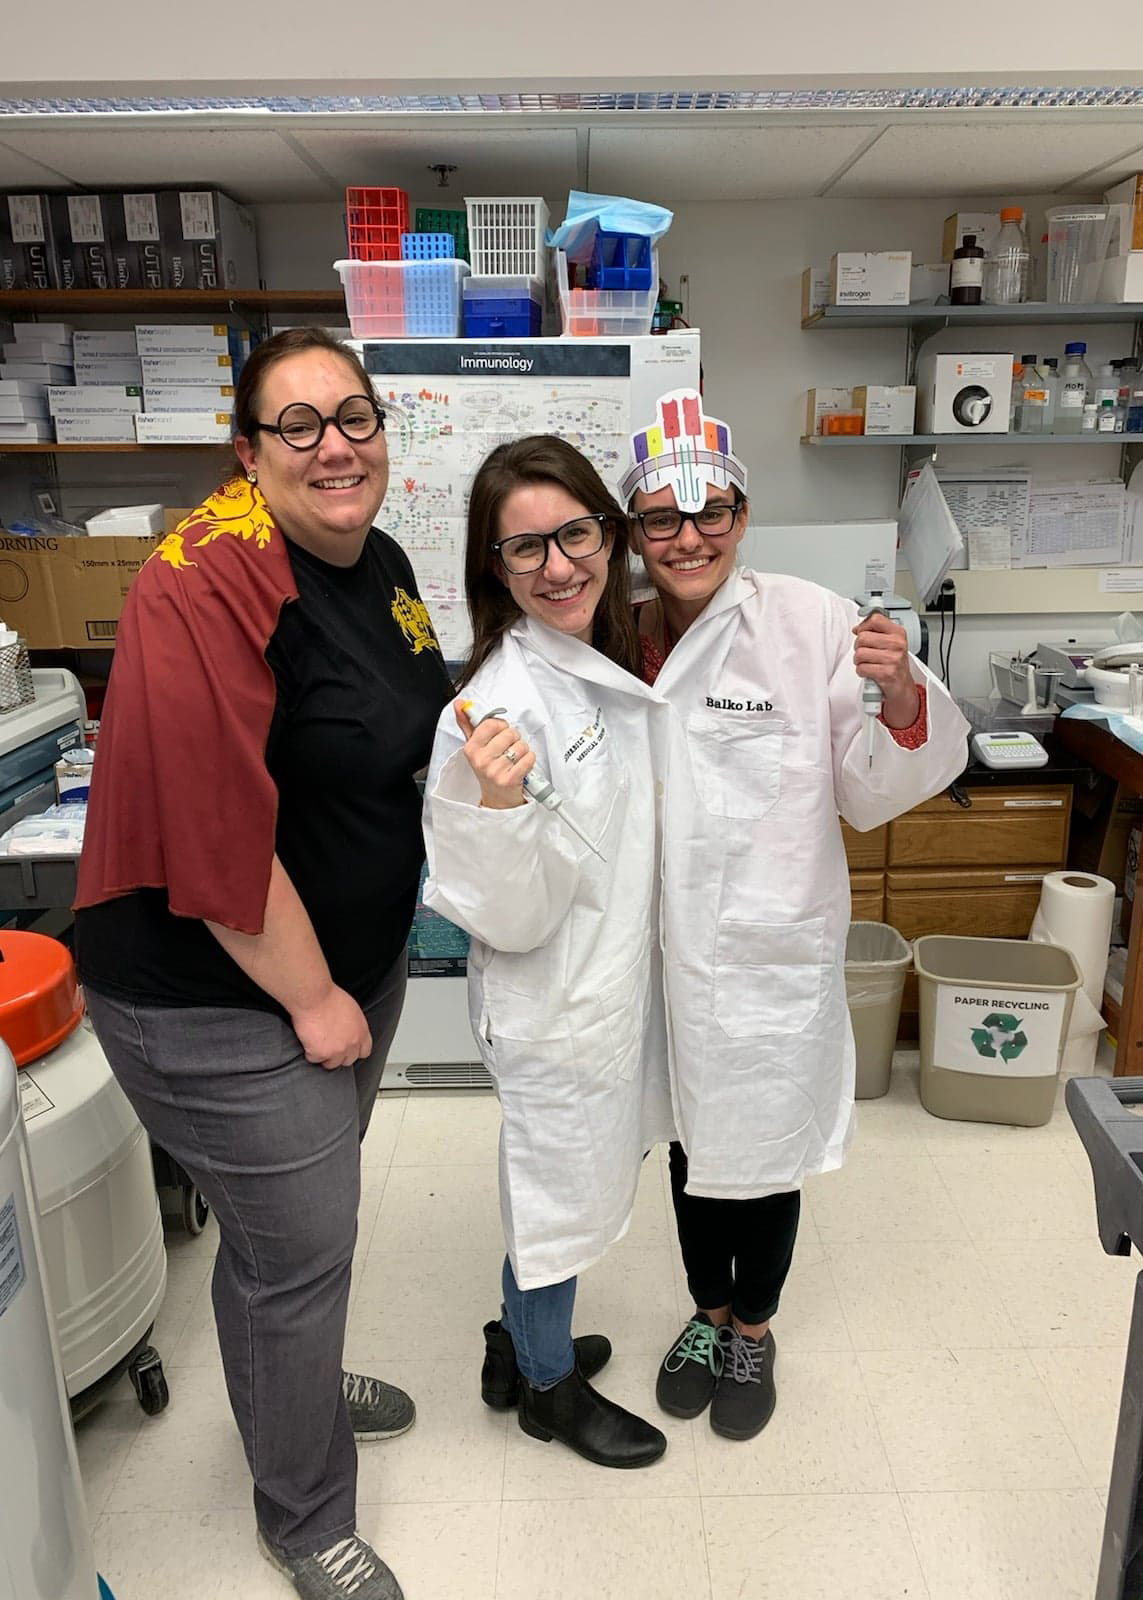 Harry Potter and the T cell-Graduate Student Hybridoma featuring Abbey Toren as Harry Potter, Elizabeth Wescott as the graduate student, and Maggie Axelrod as a T cell in Balko Lab